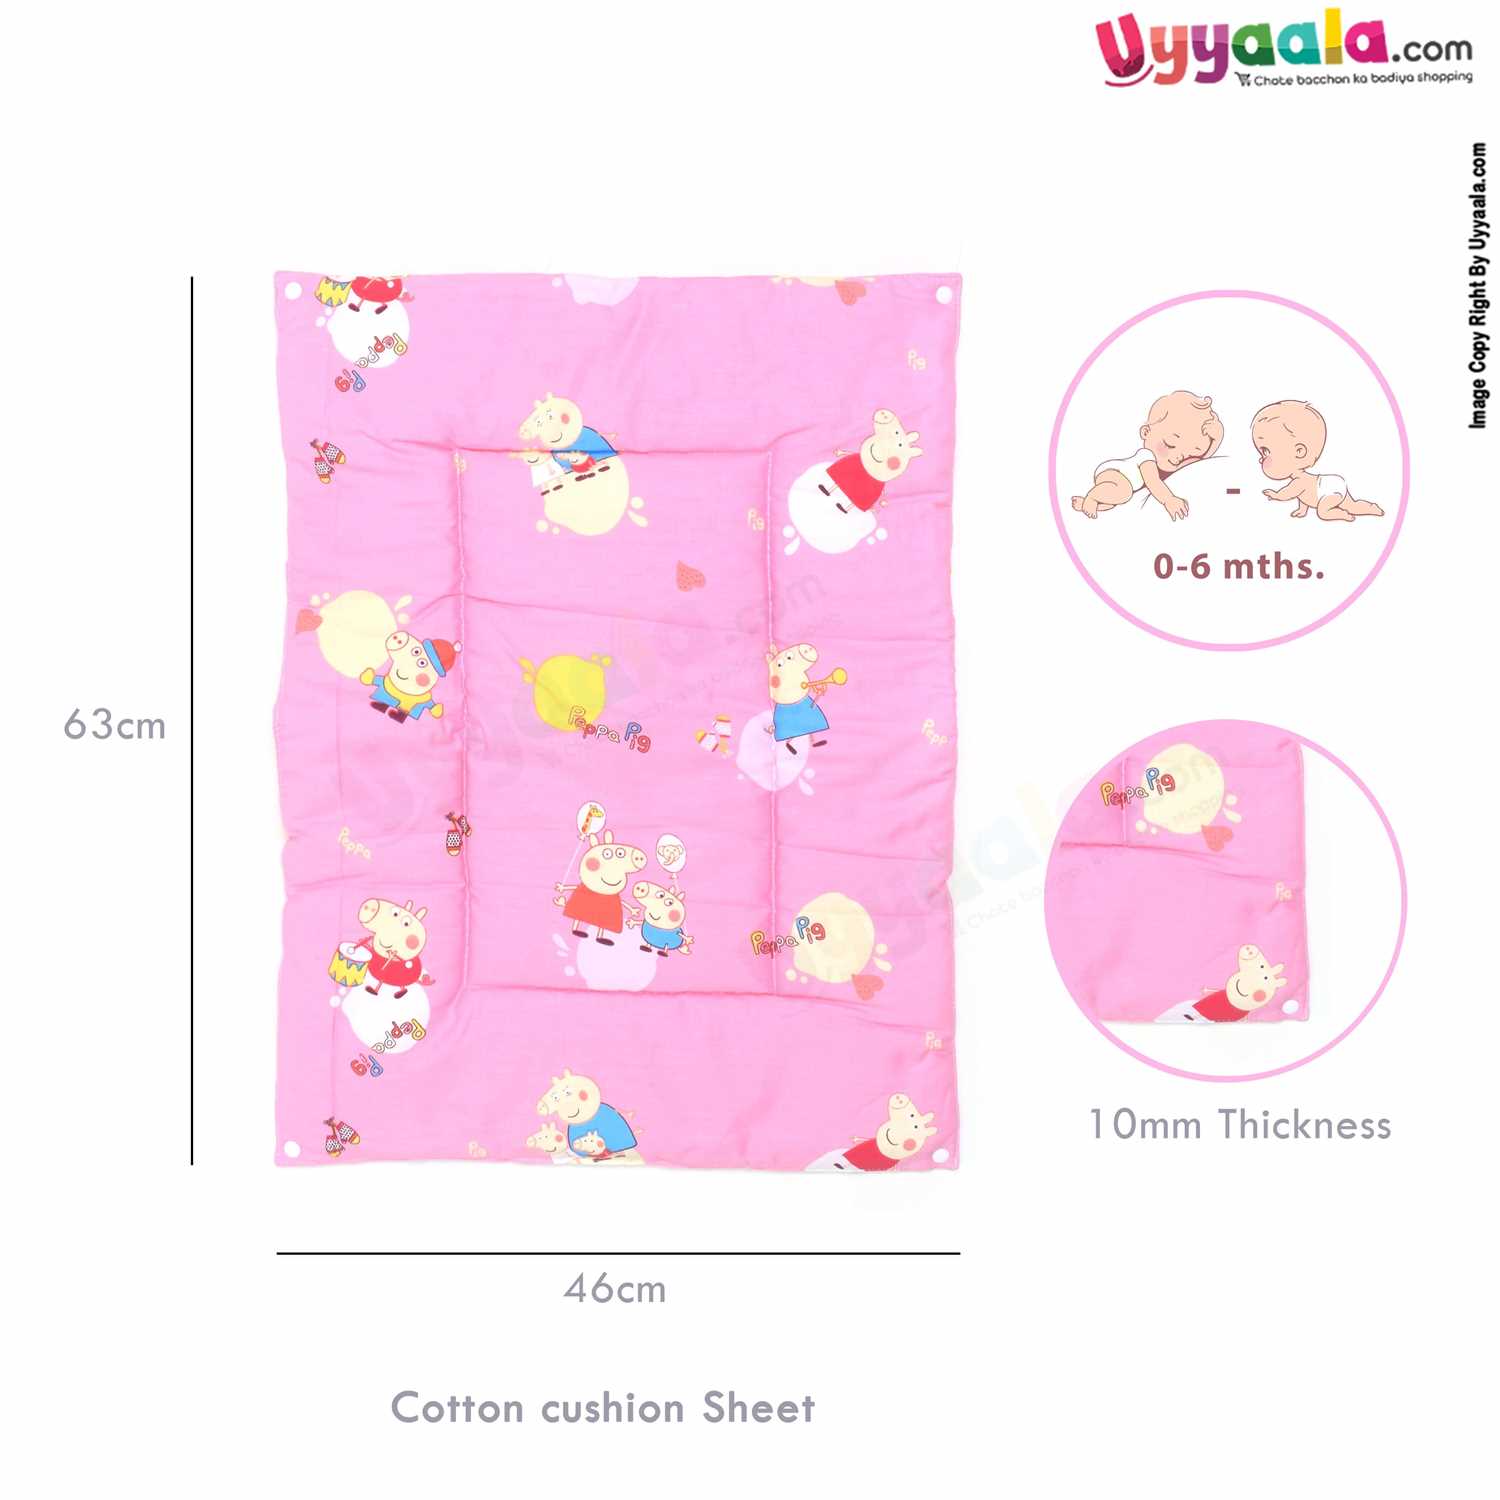 Cotton Foam Cushioned & Plastic detachable Changing Sheets 3 in 1 Set With Peppa Pig & Balloon Print - Pink